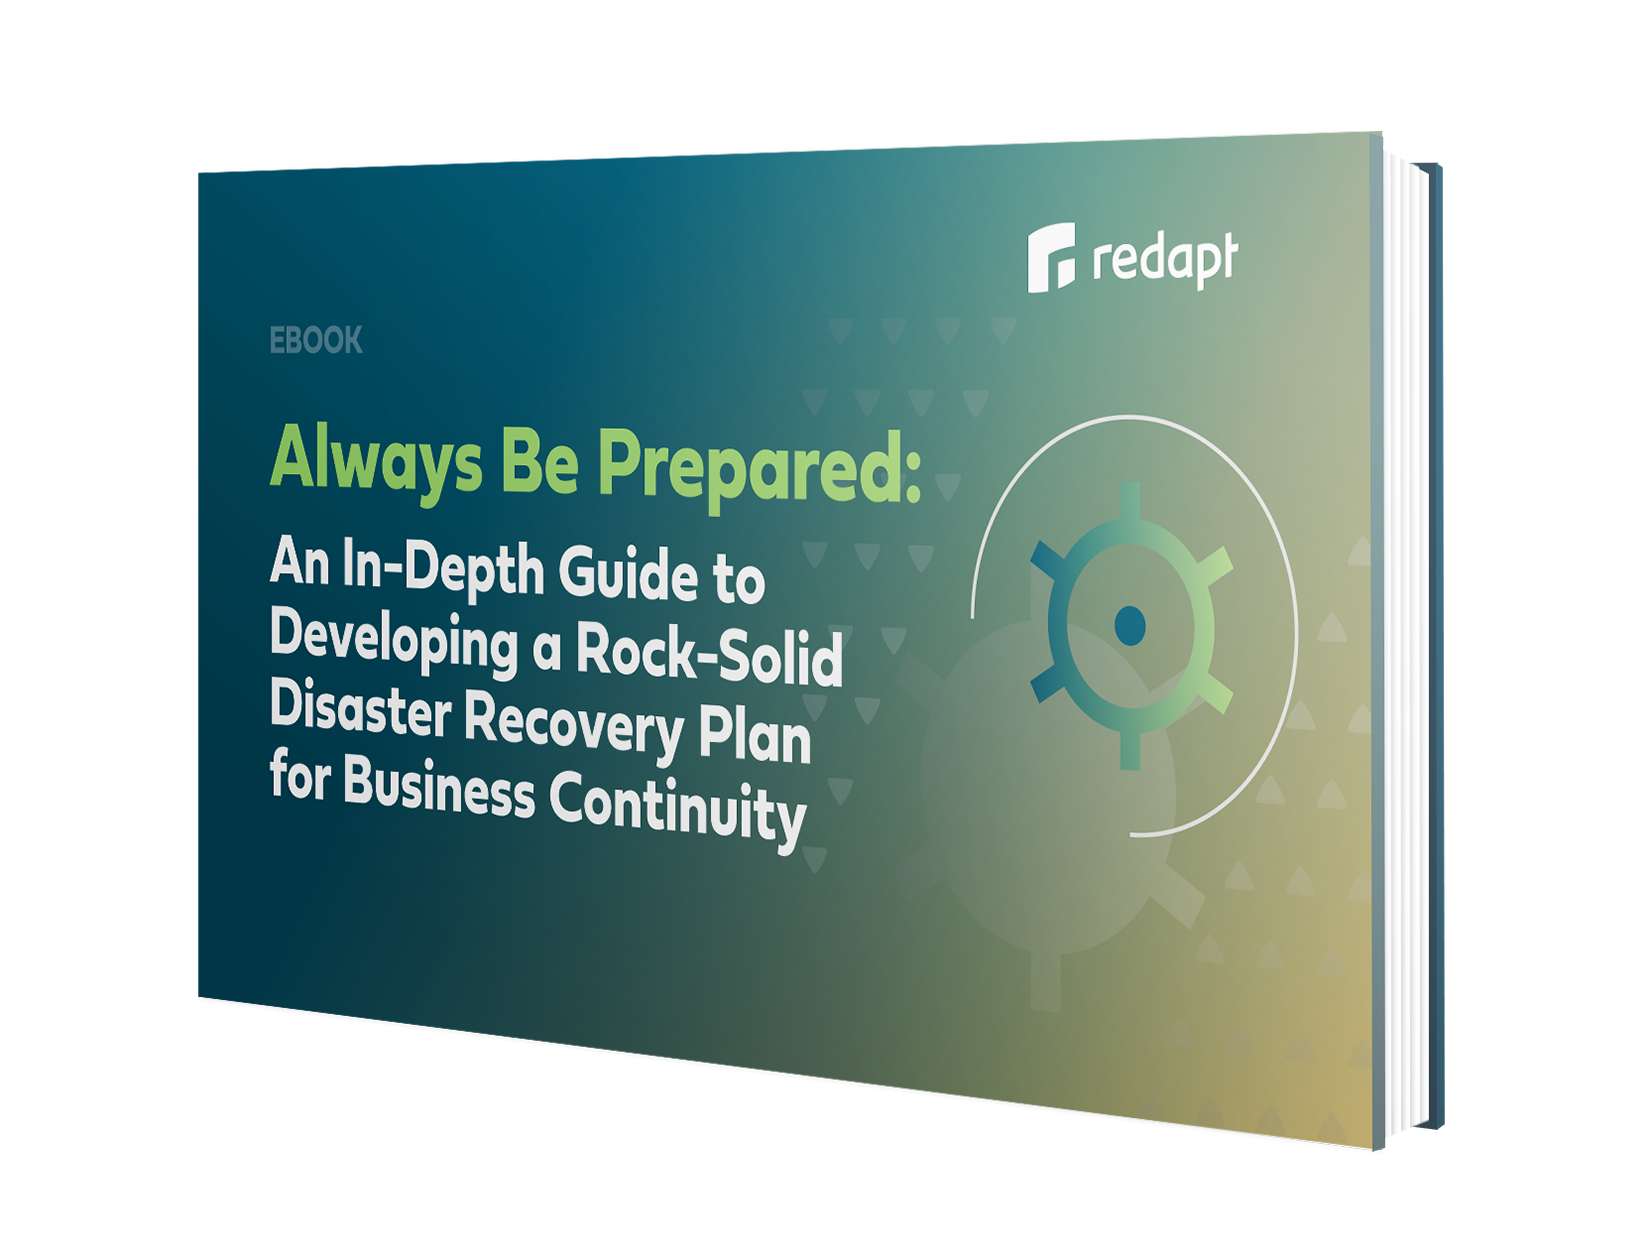 Always Be Prepared: An In-Depth Guide to Developing a Rock-Solid Disaster Recovery Plan for Business Continuity